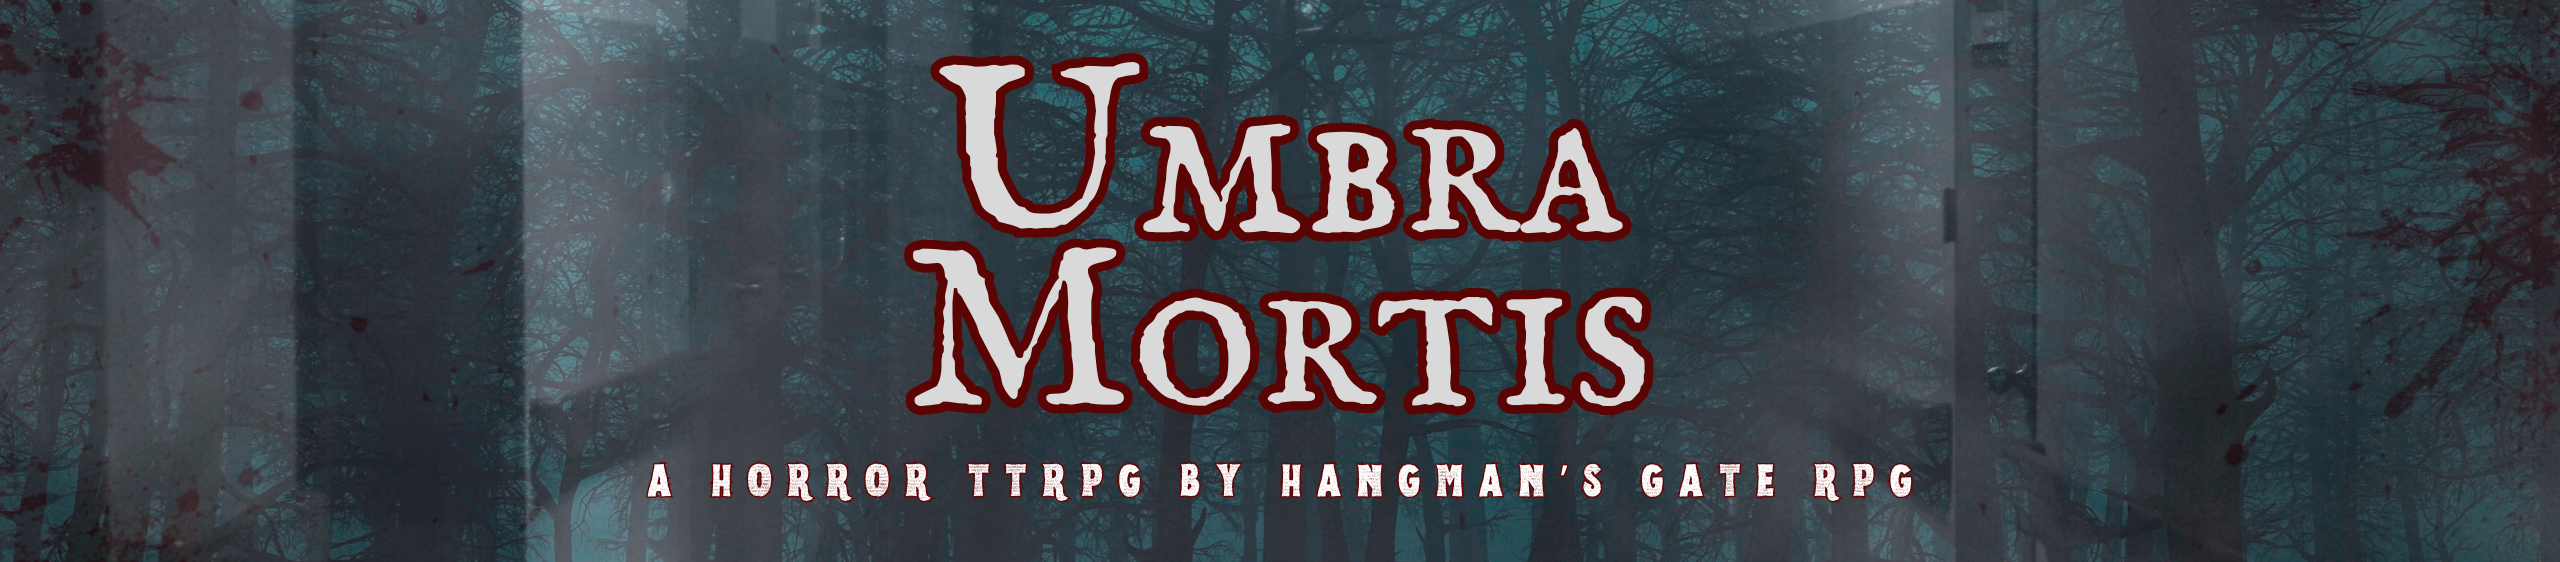 Umbra Mortis: The Shadow of Death